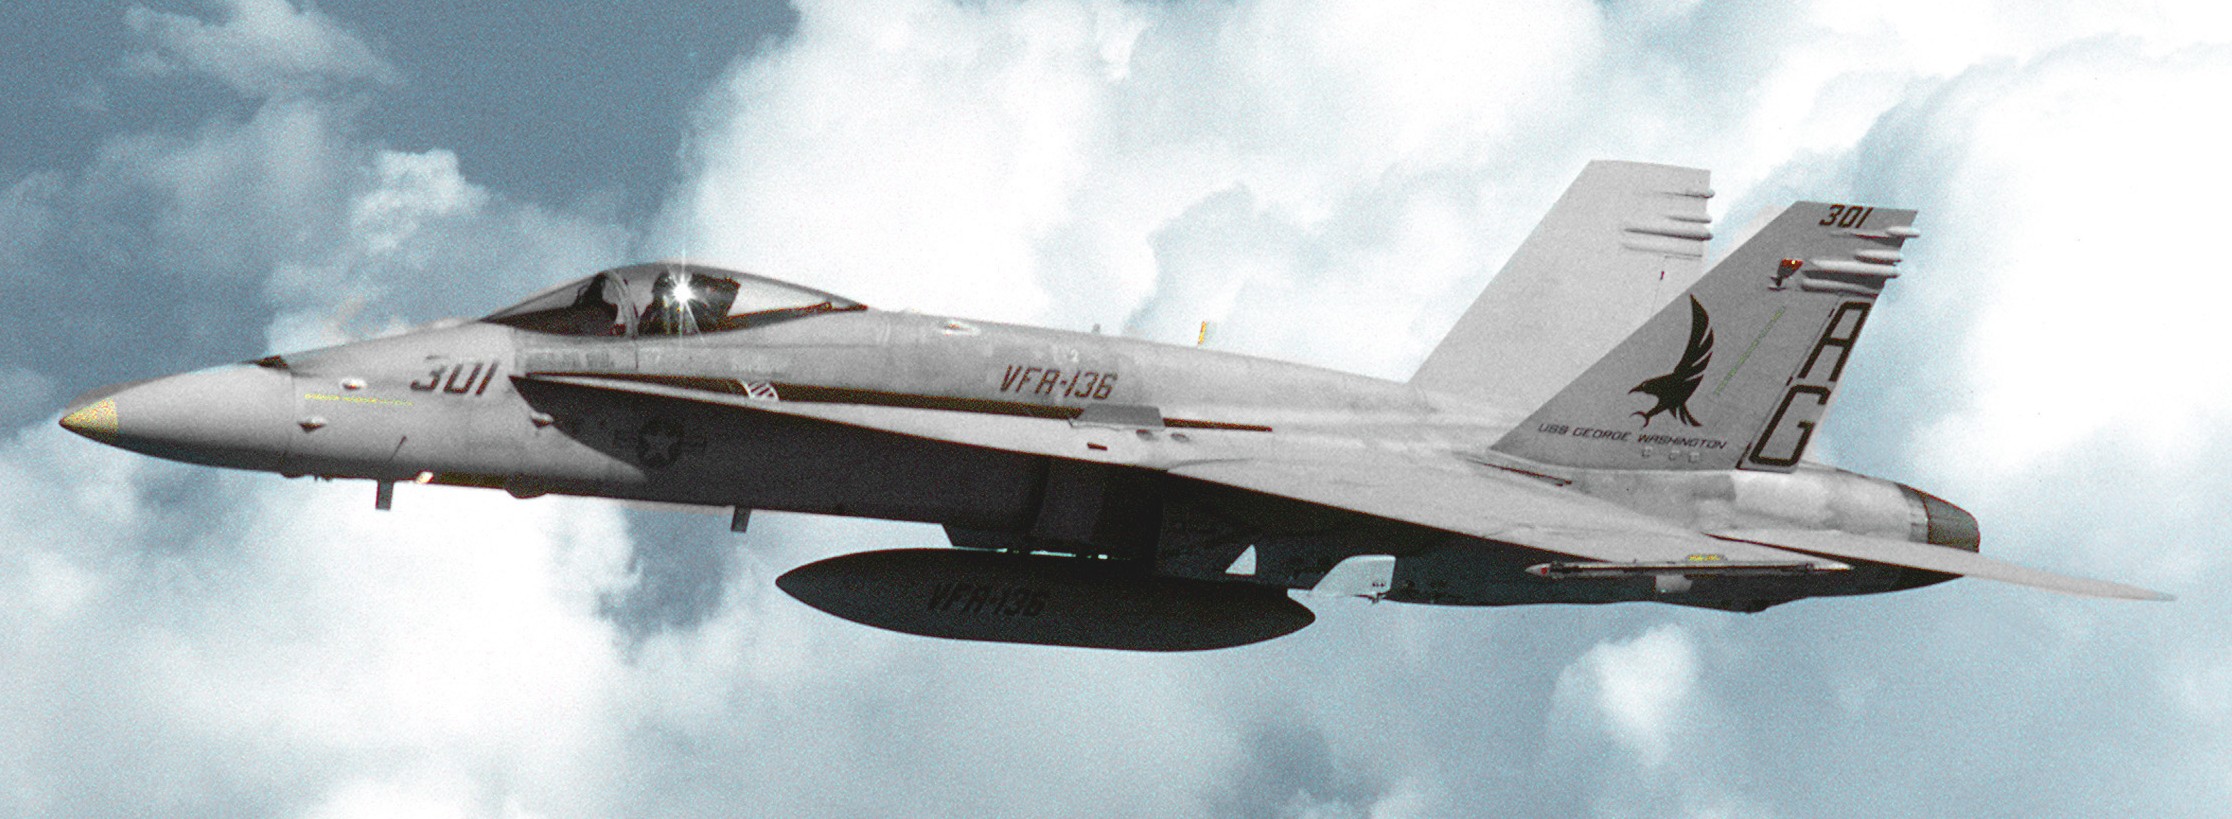 vfa-136 knighthawks strike fighter squadron f/a-18c hornet 1992 80 cvw-7 naval station roosevelt roads puerto rico